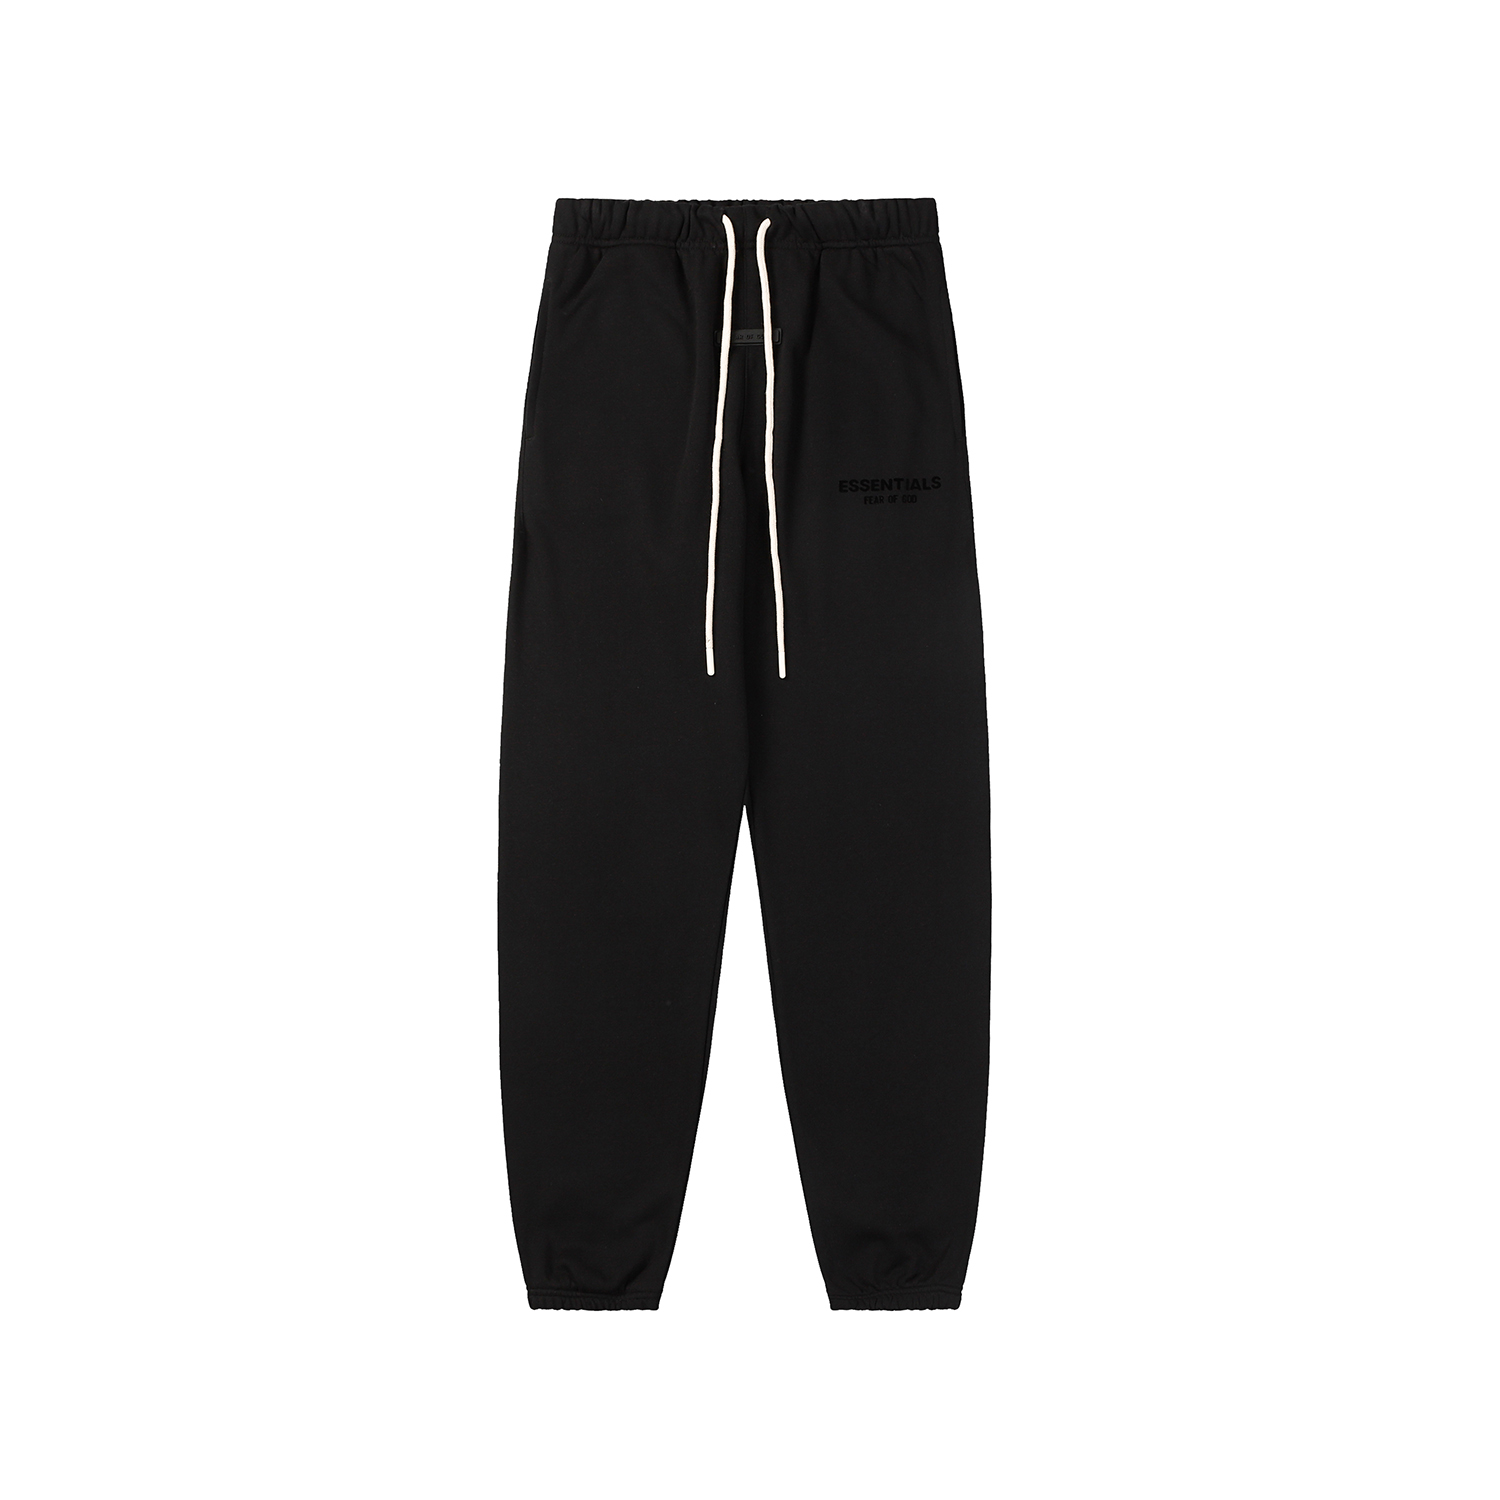 ESSENTIALS Clothing Pants & Trousers Good Quality Replica
 Black Grey White Essential